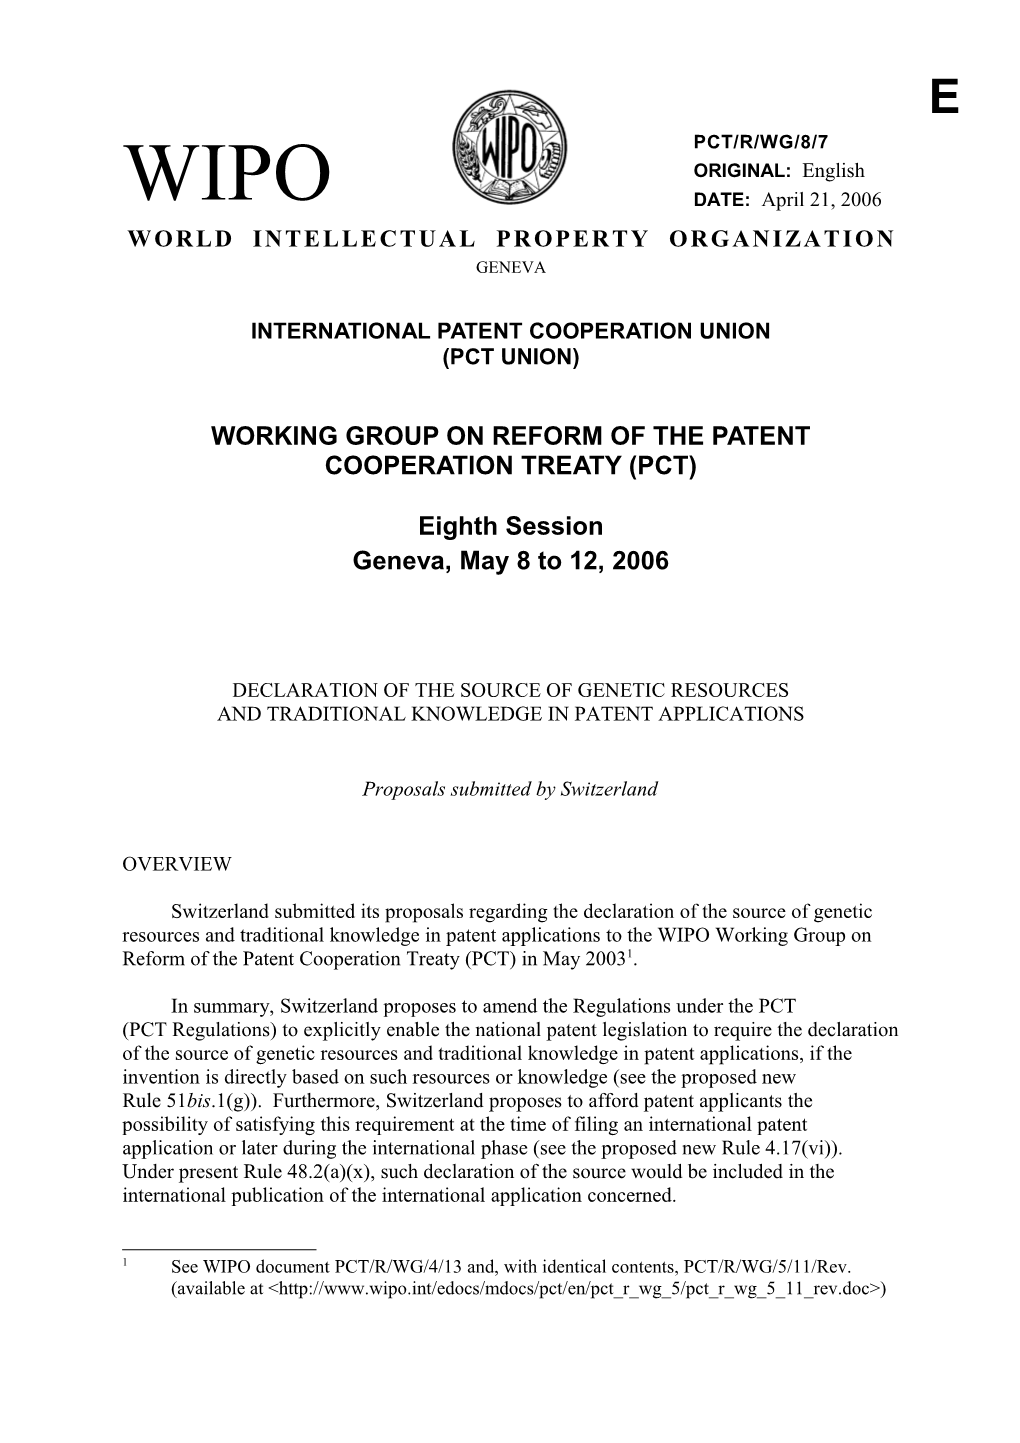 PCT/R/WG/8/7: Declaration of the Source of Genetic Resources and Traditional Knowledge